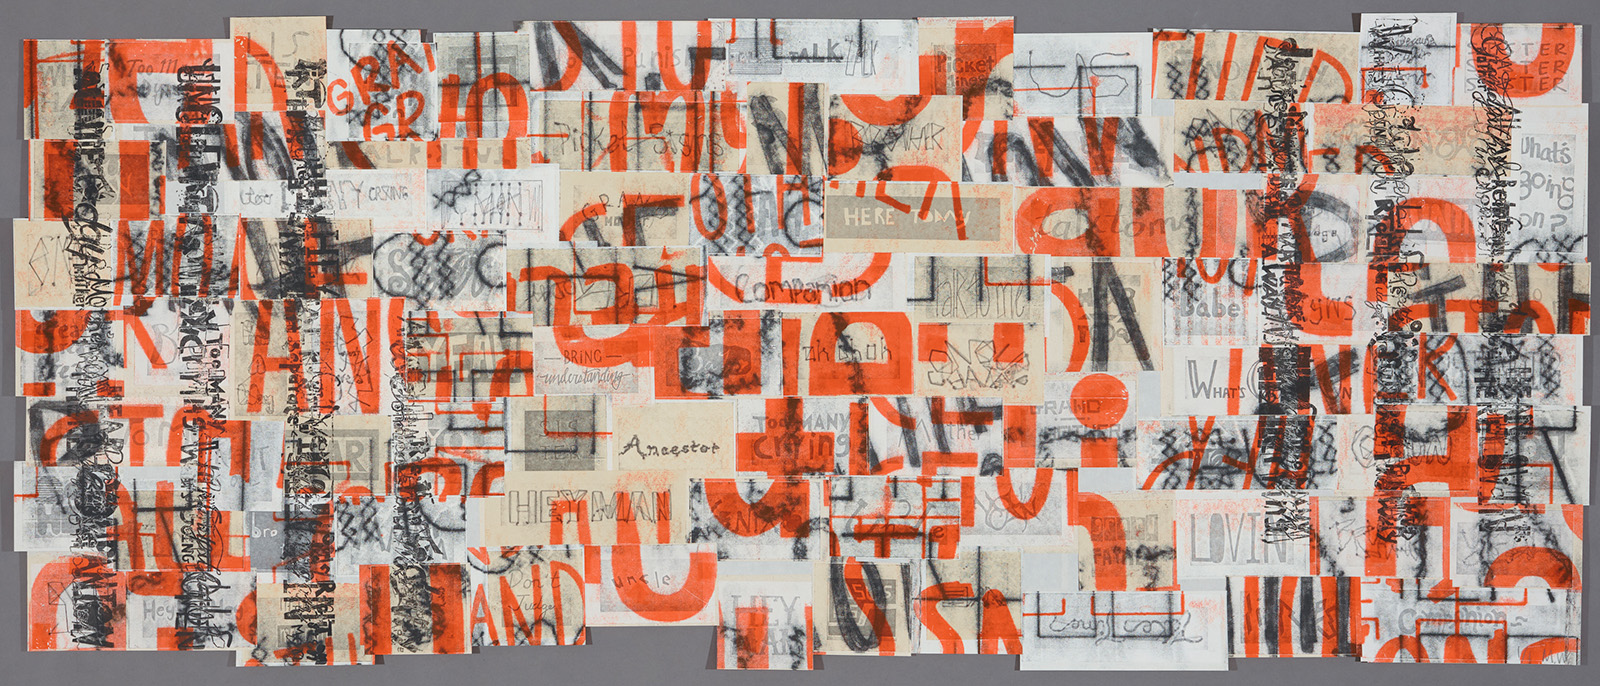 A collage of overlapping rectangles breaking up words and letters in orange, black, gray, cream, and white